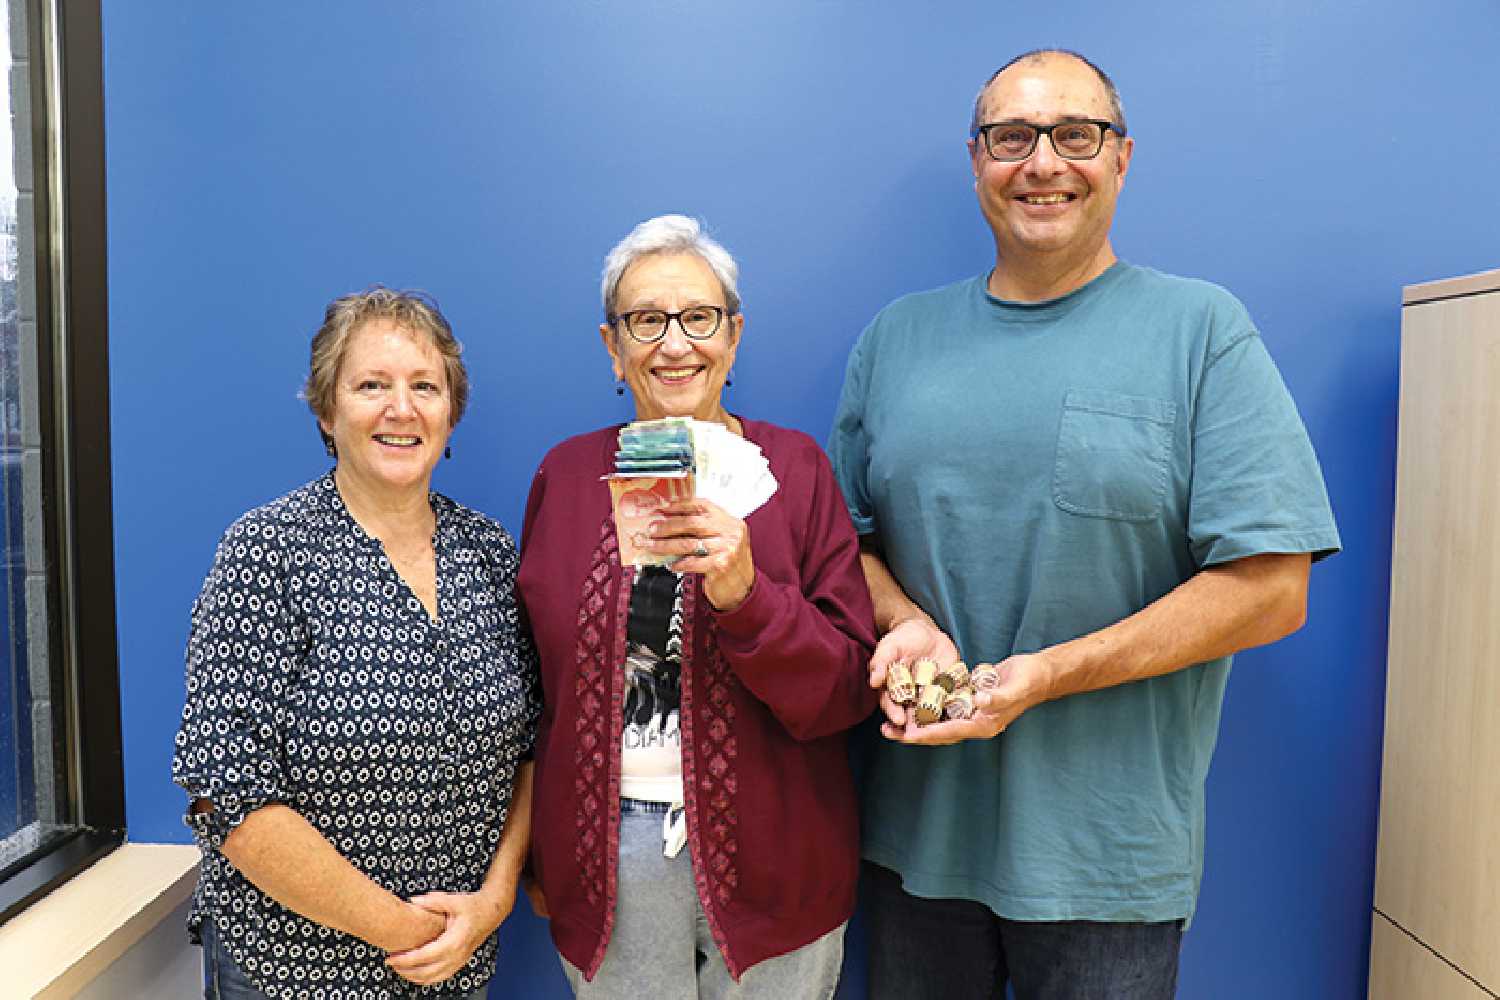 Sharon Brolund donated $1,365 to the Moosomin CT Scanner Fund last Thursday. From left are, Wendy Lynd of the Moosomin and District Health Care Foundation accepting the donation from Sharon Brolund and her son, Michael Brolund. 